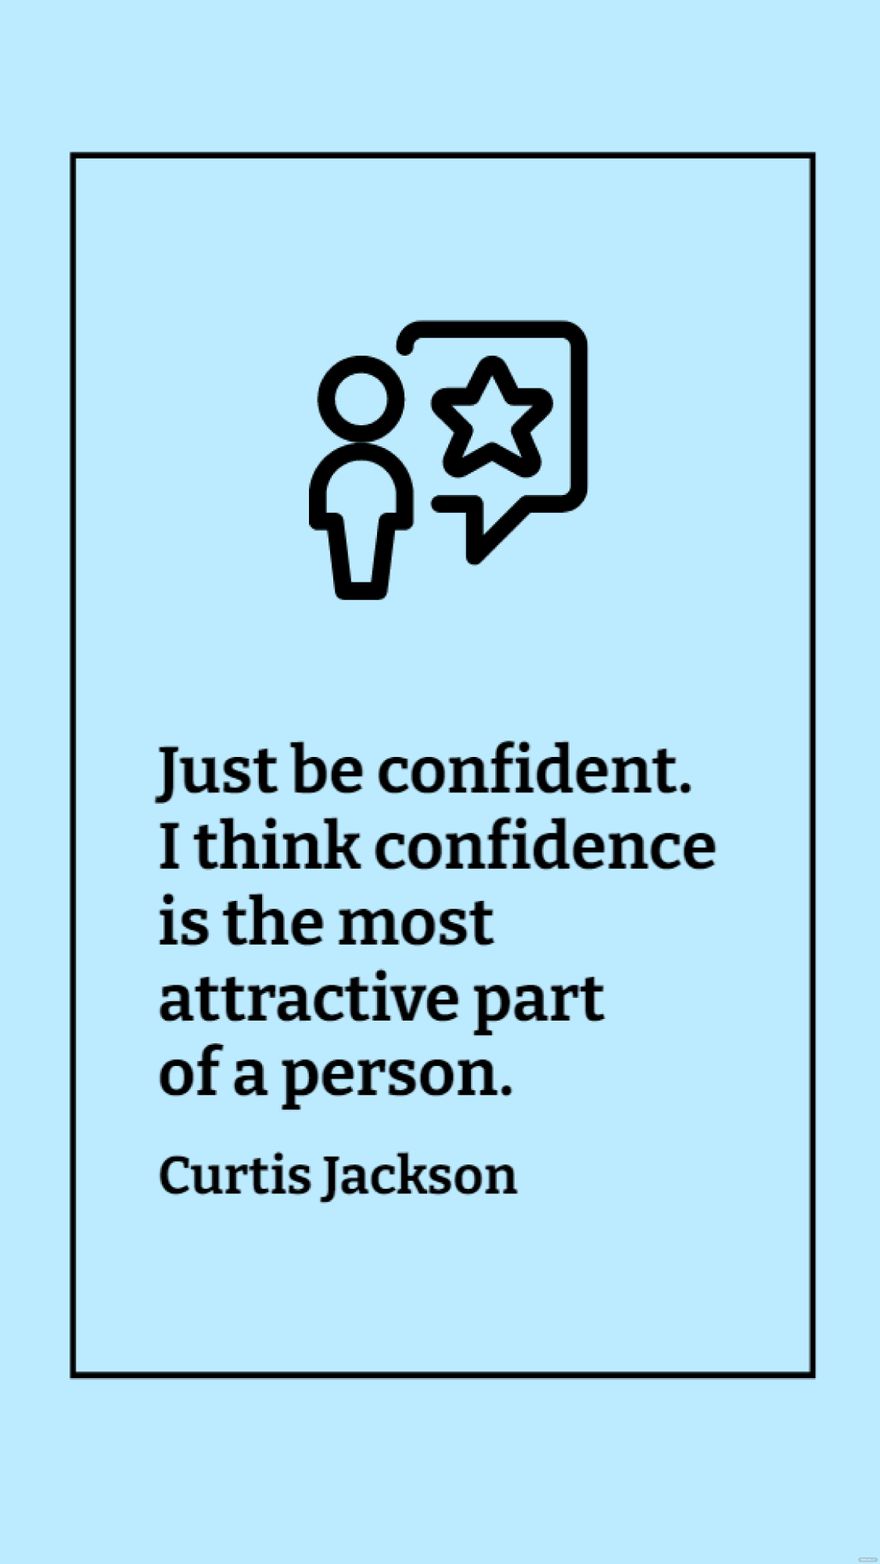 Free Curtis Jackson - Just be confident. I think confidence is the most attractive part of a person. in JPG